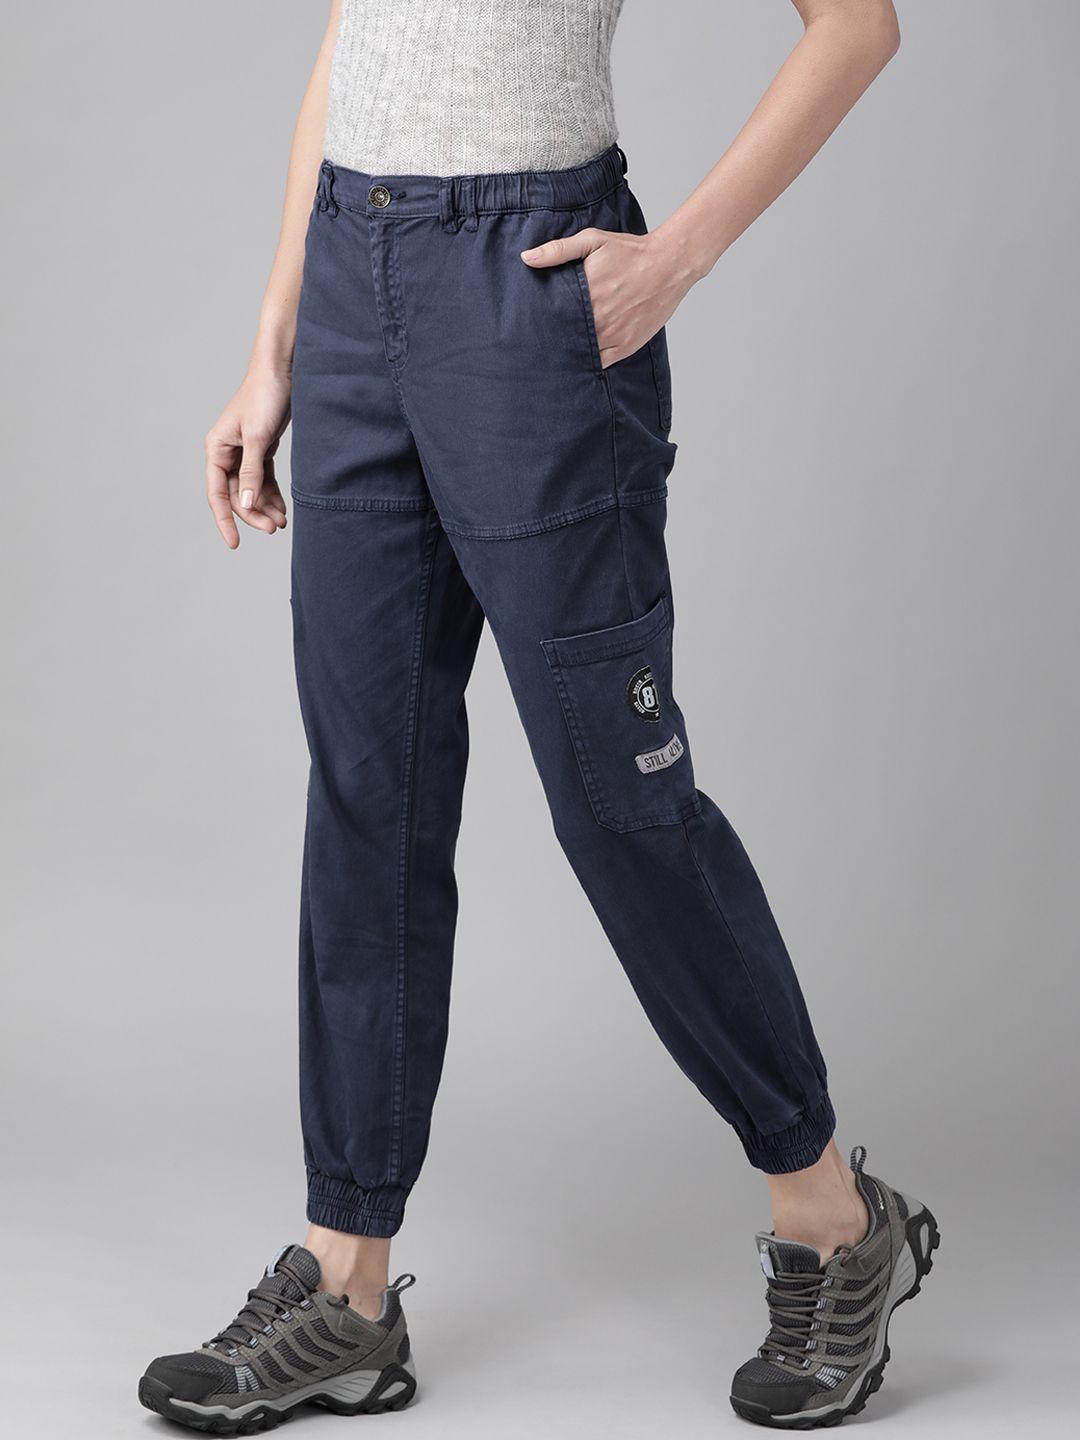 the-roadster-lifestyle-co-women-navy-blue-solid-cargo-joggers